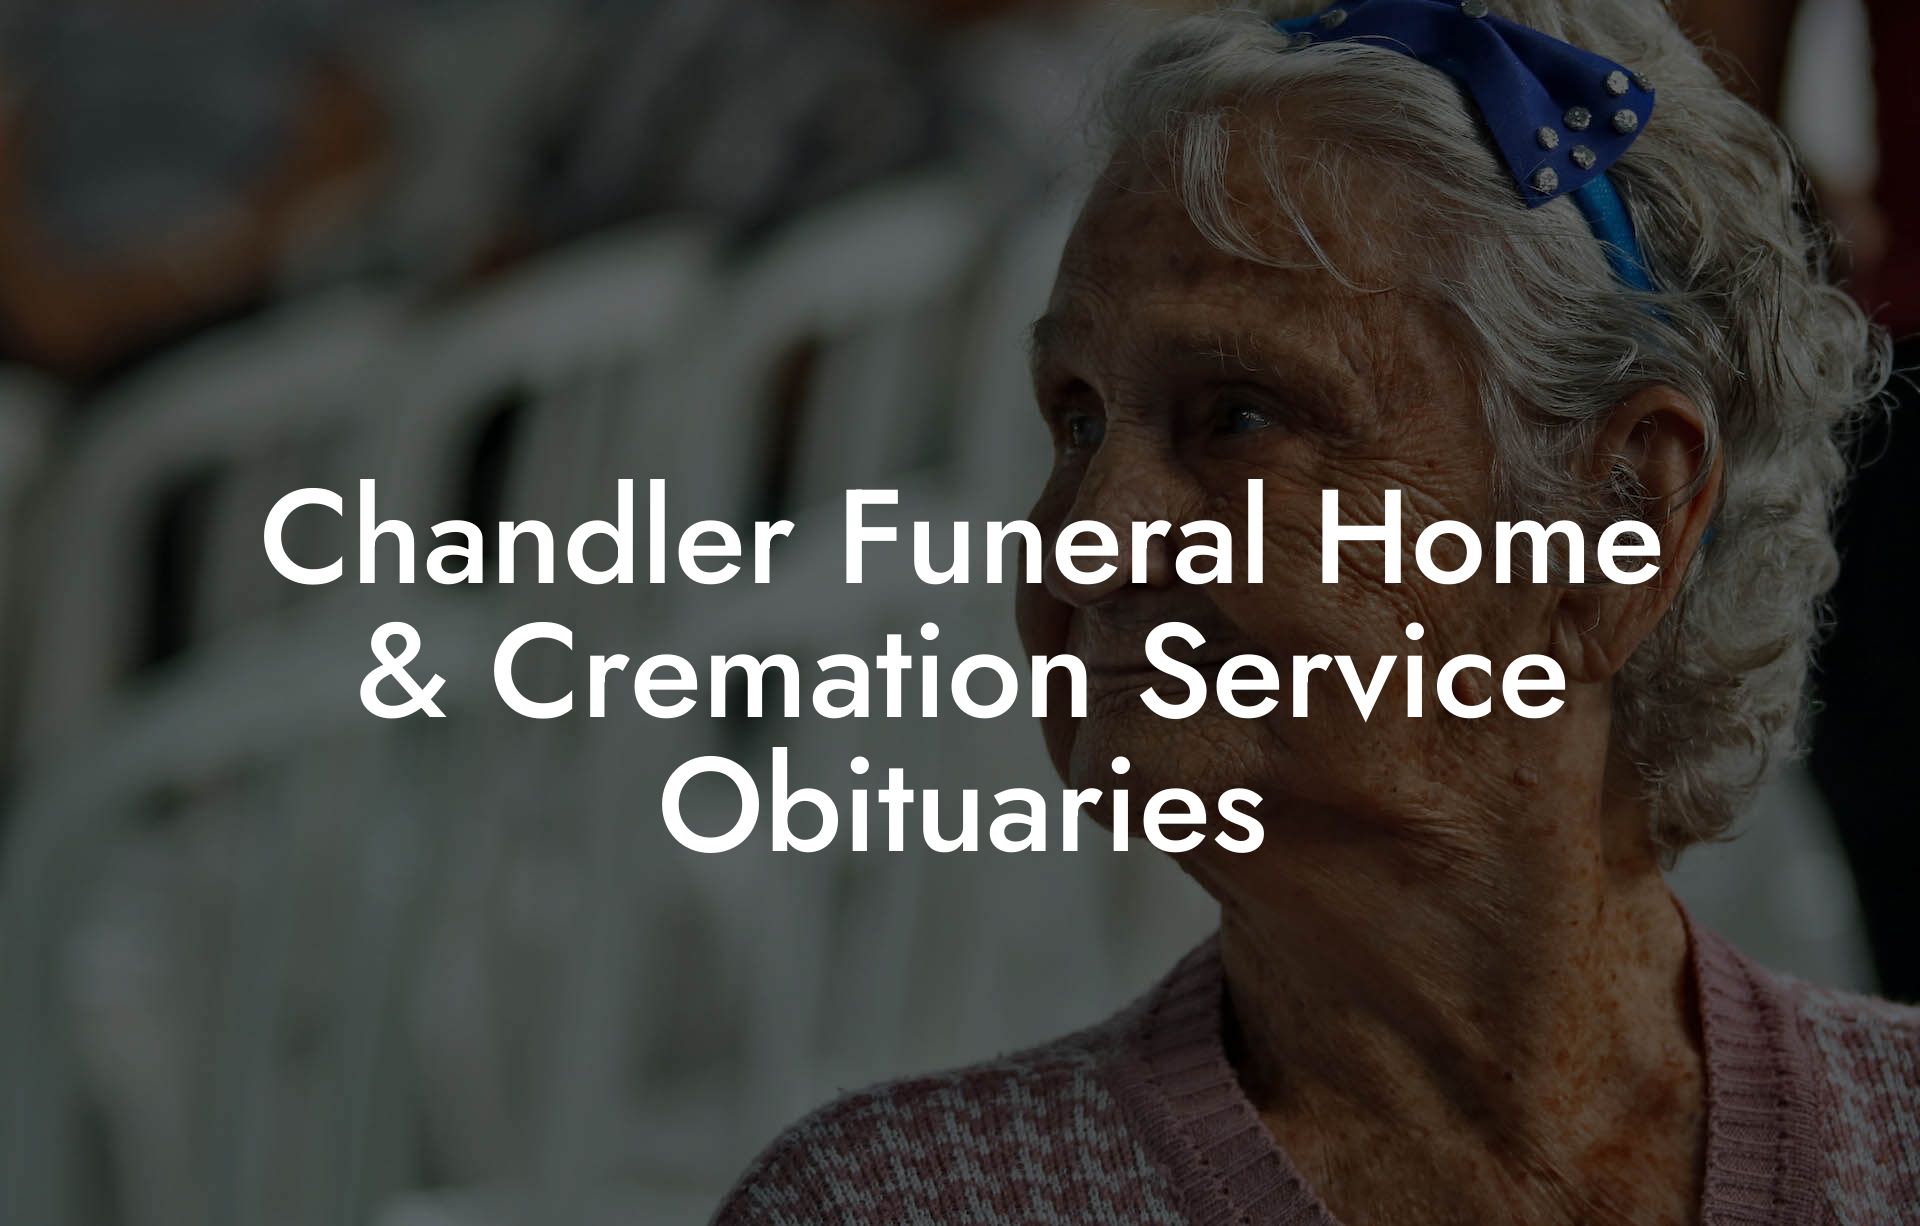 Chandler Funeral Home & Cremation Service Obituaries